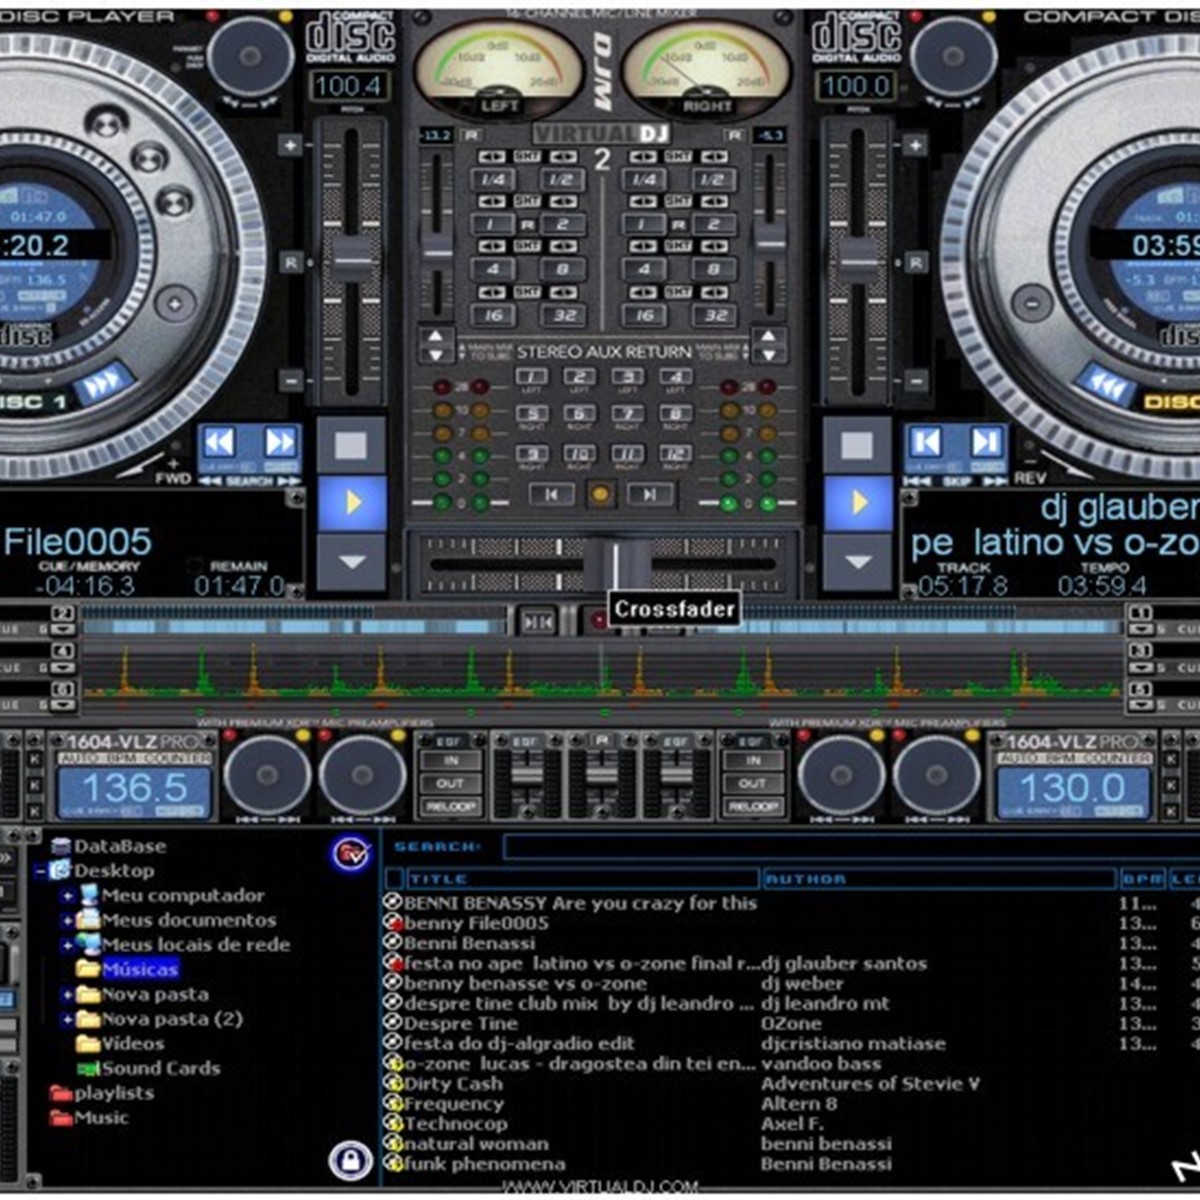 download free dj mixer software for pc full version